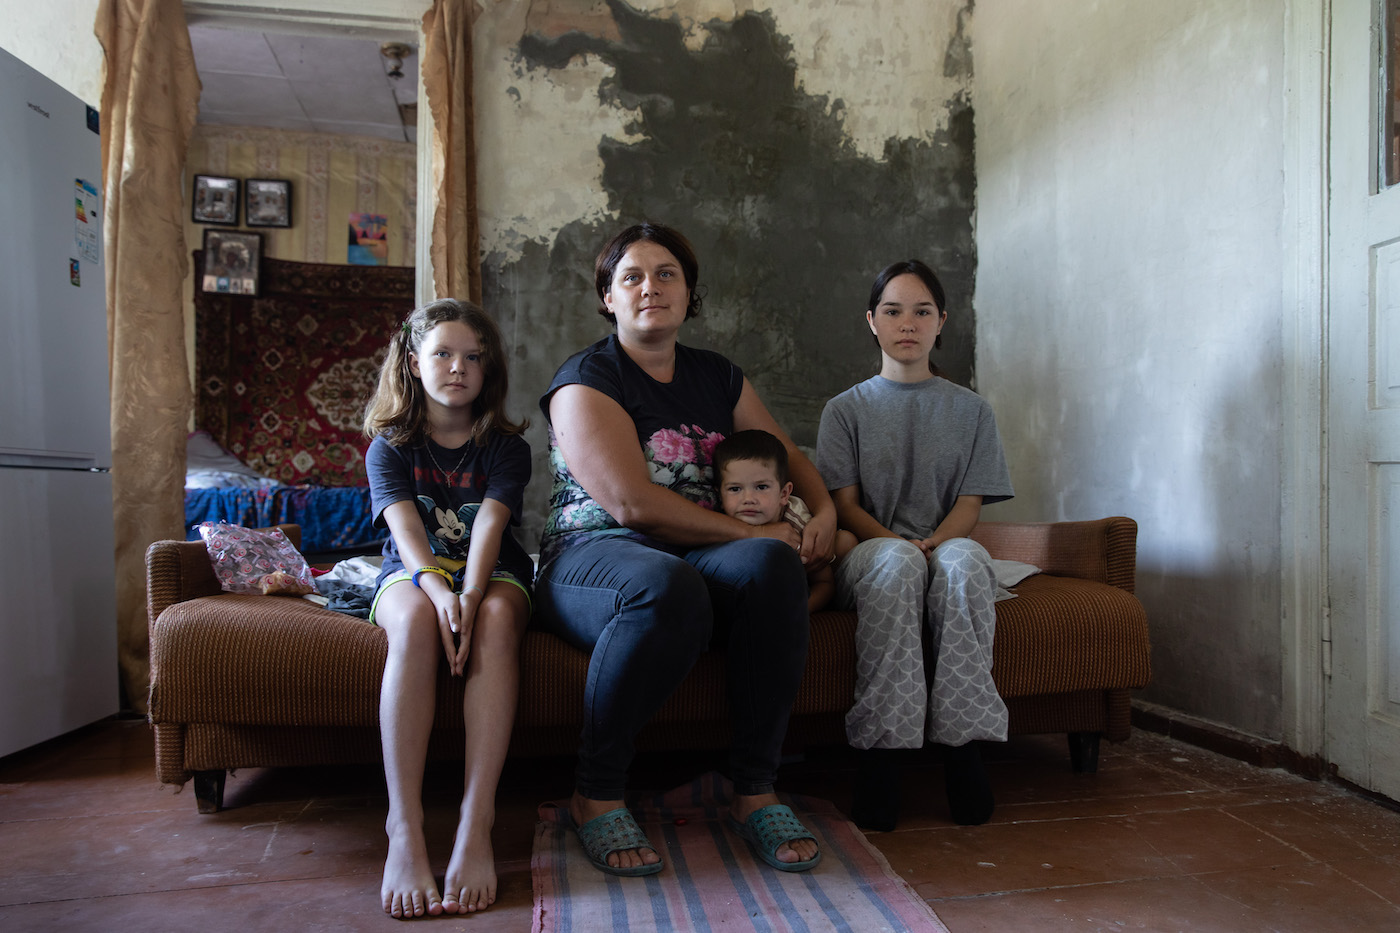 IDP Lesya* (33) with her three children in a house in Sumy Oblast where they were allowed to stay after the death of the owner. (Photo: Mykhaylo Palinchak/Concern Worldwide)